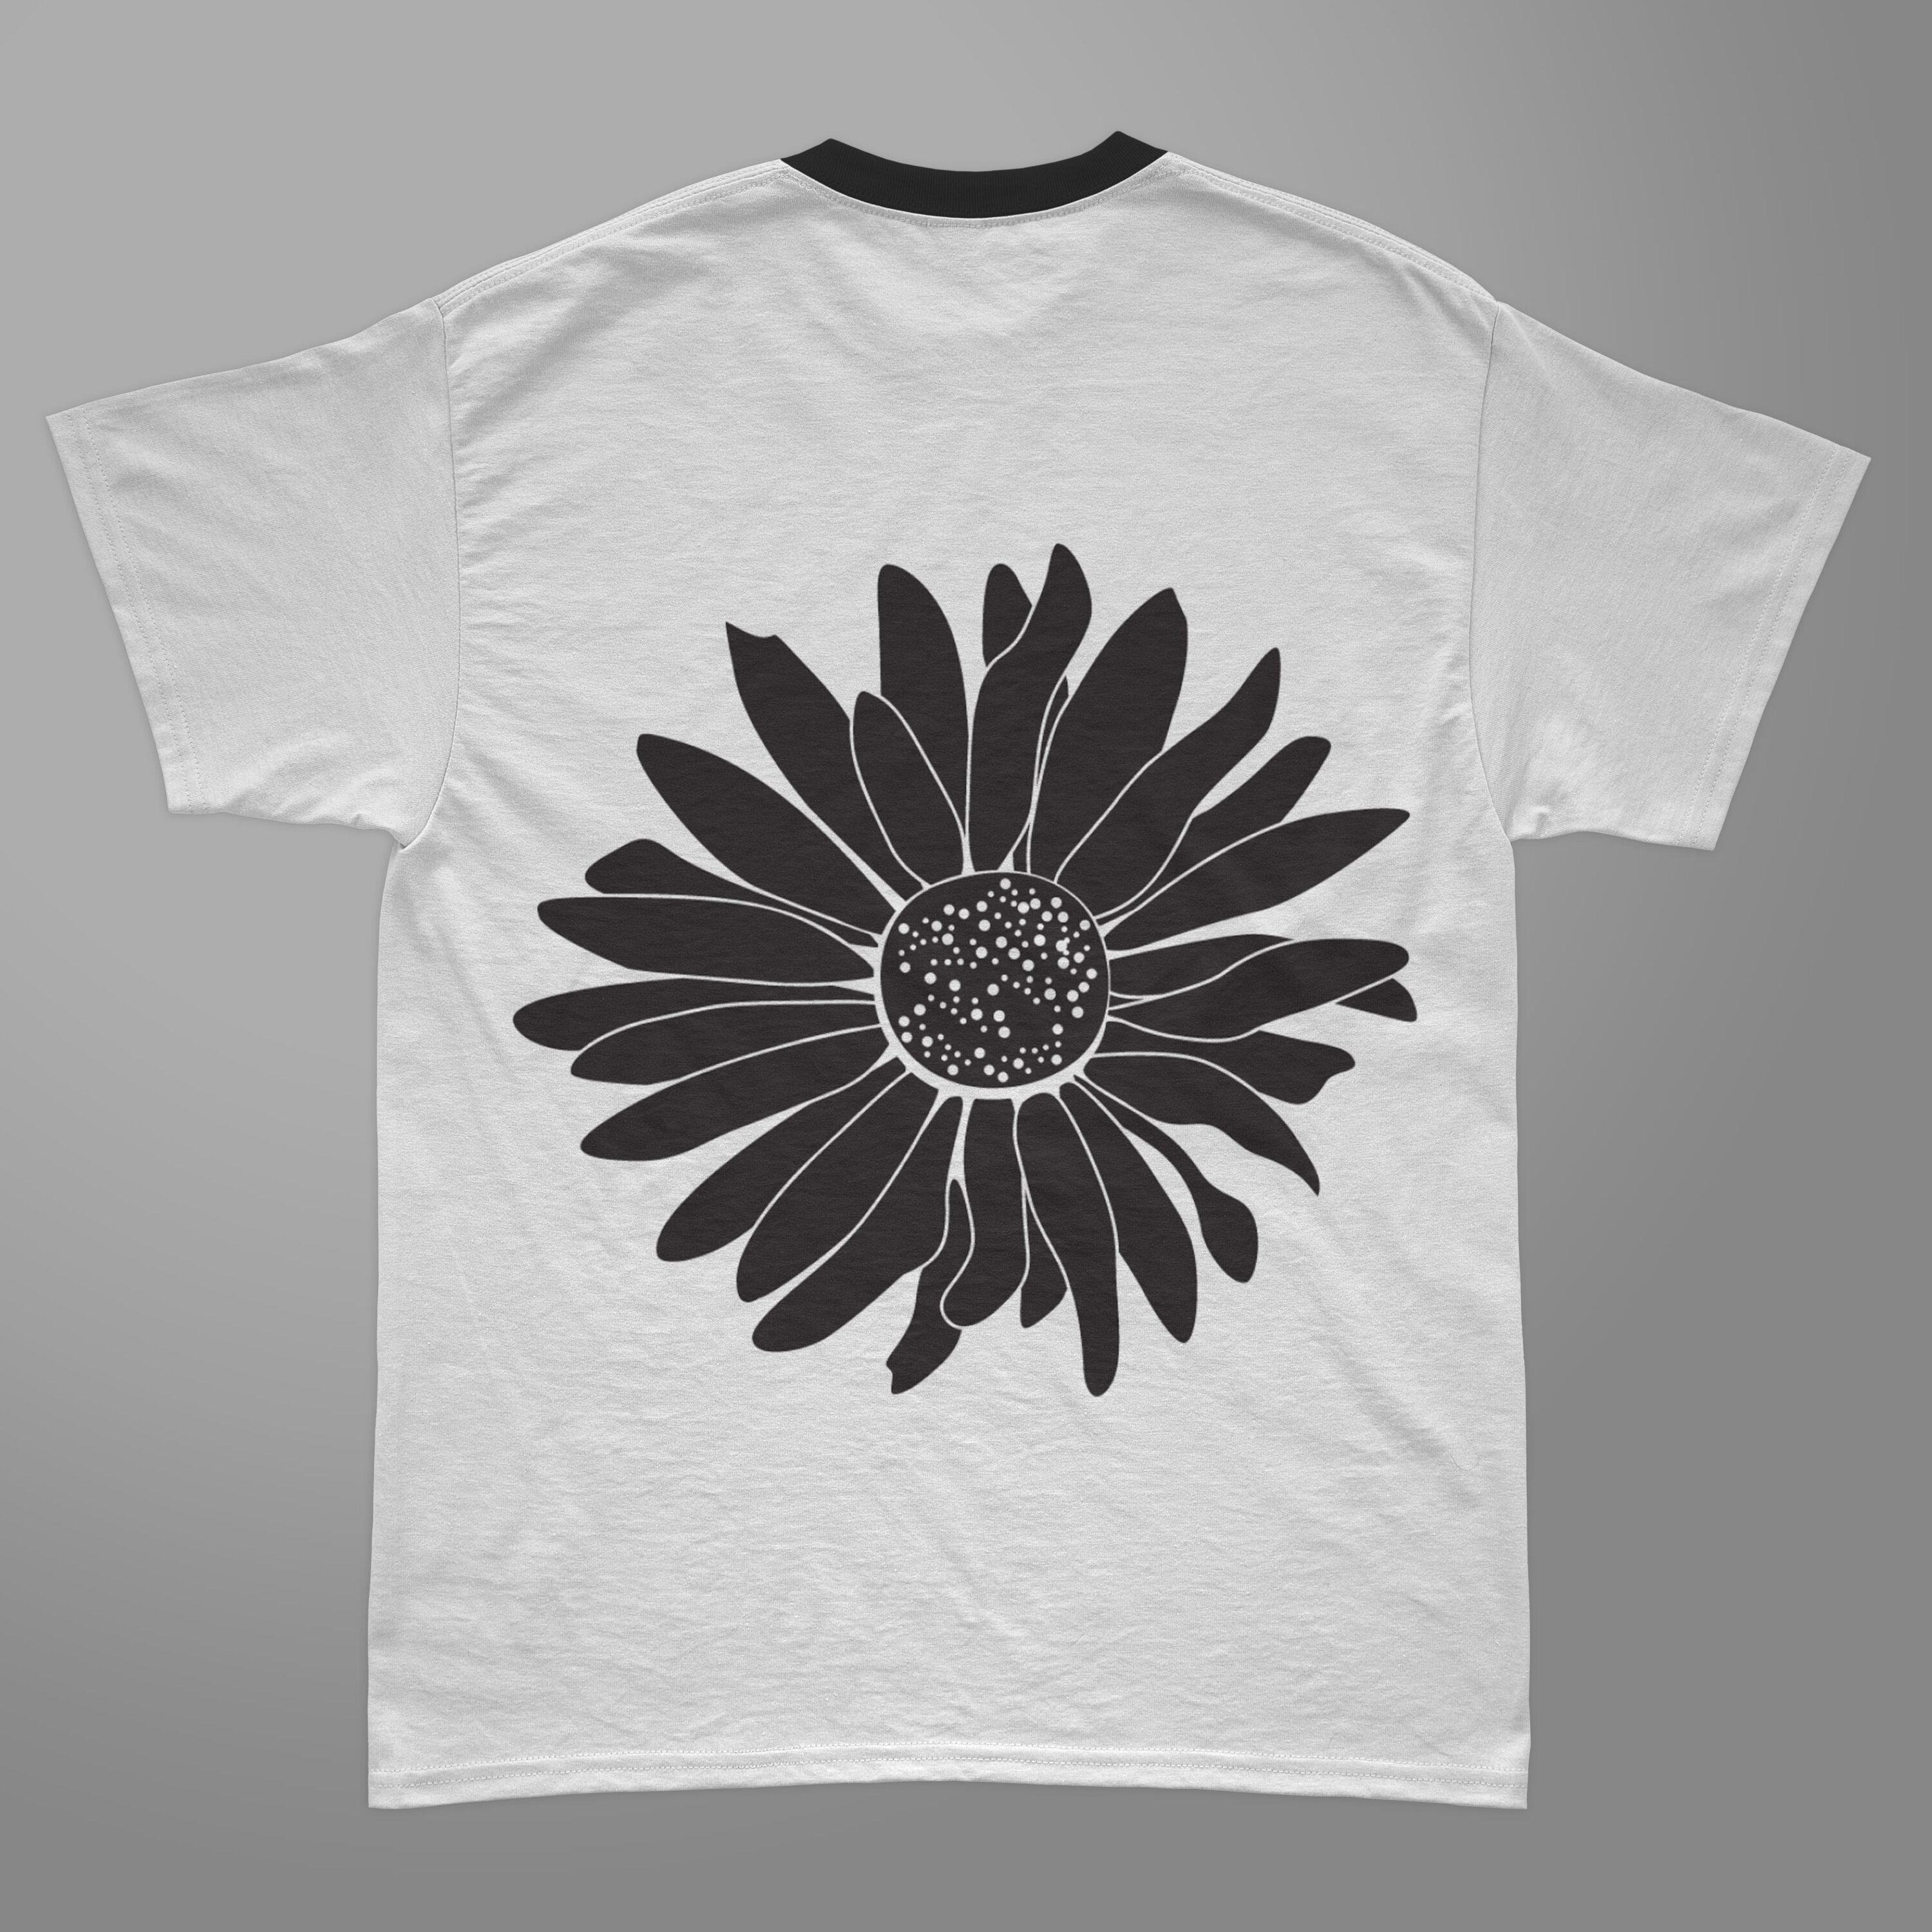 Silhouette daisy printed on the t-shirt.